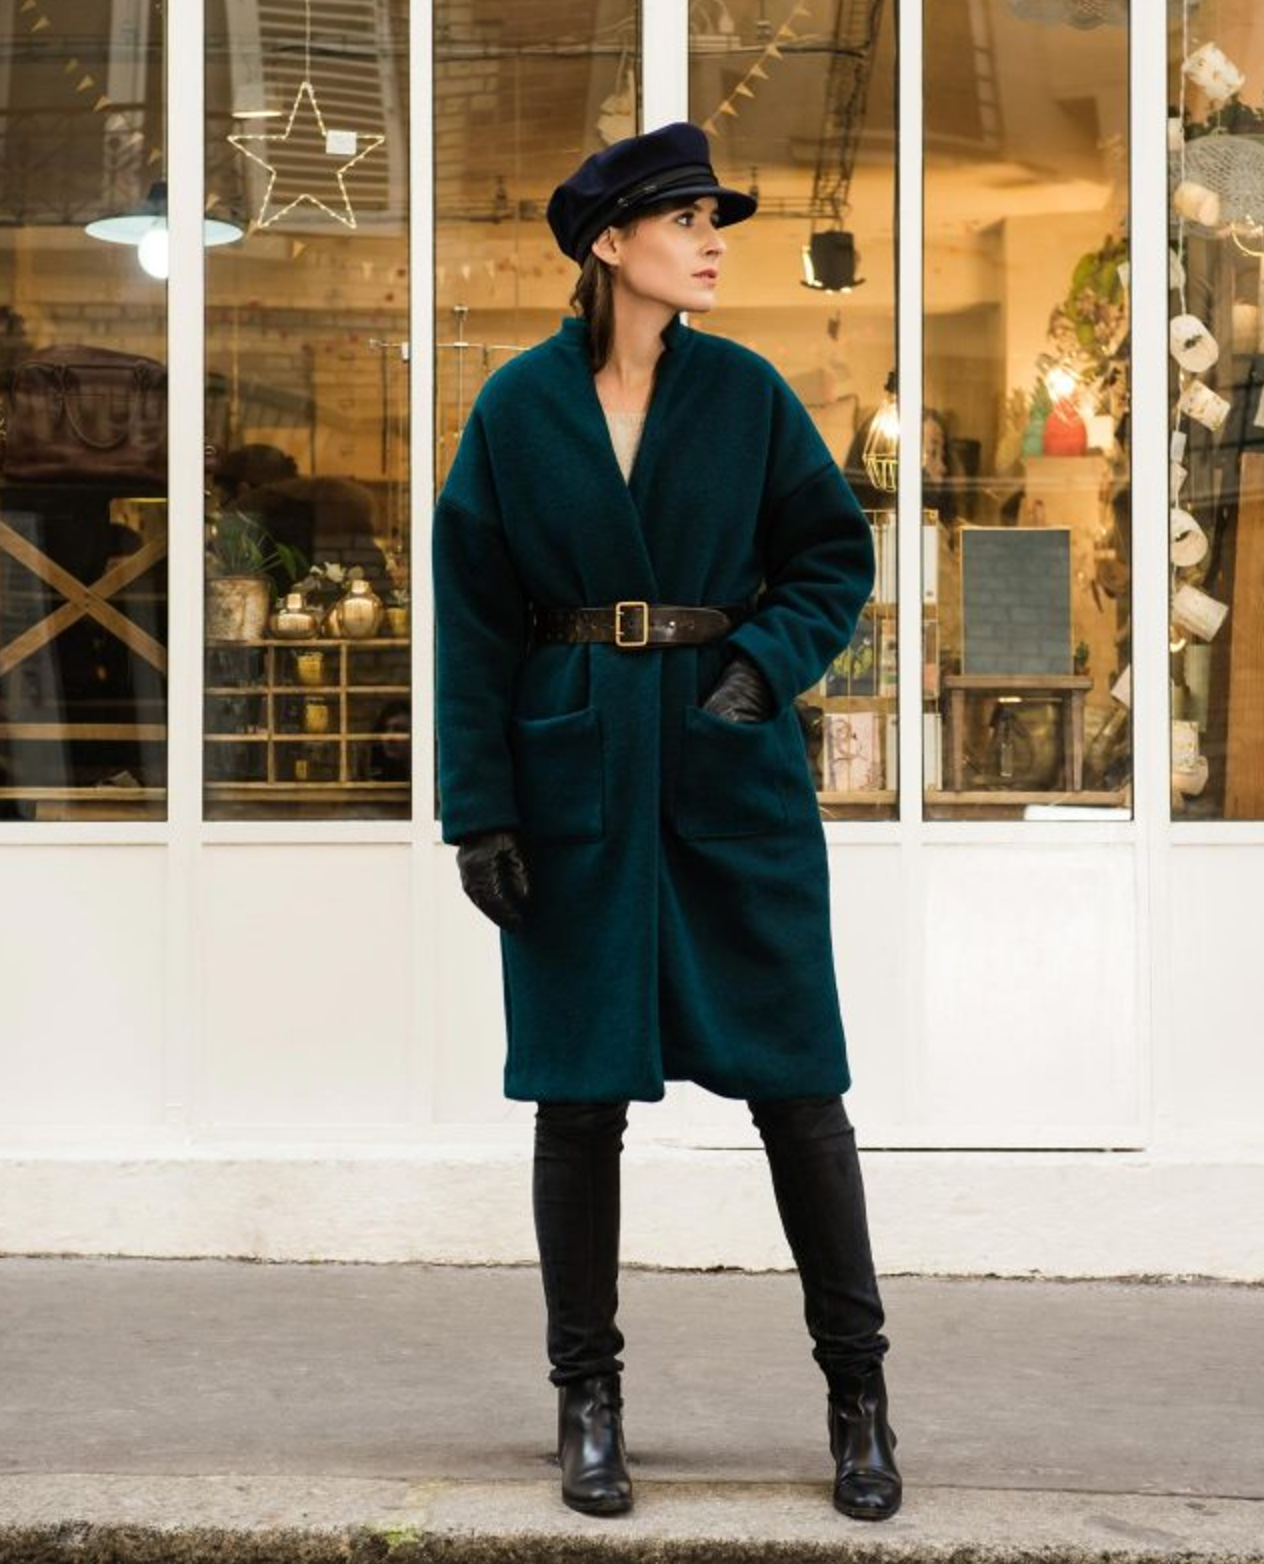 Woman wearing the Riga Coat sewing pattern from Orageuse on The Fold Line. A coat pattern made in wool, broadcloth or tweed fabrics, featuring a stand collar, relaxed fit, dropped shoulders, front patch pockets, full length sleeves and knee length finish.